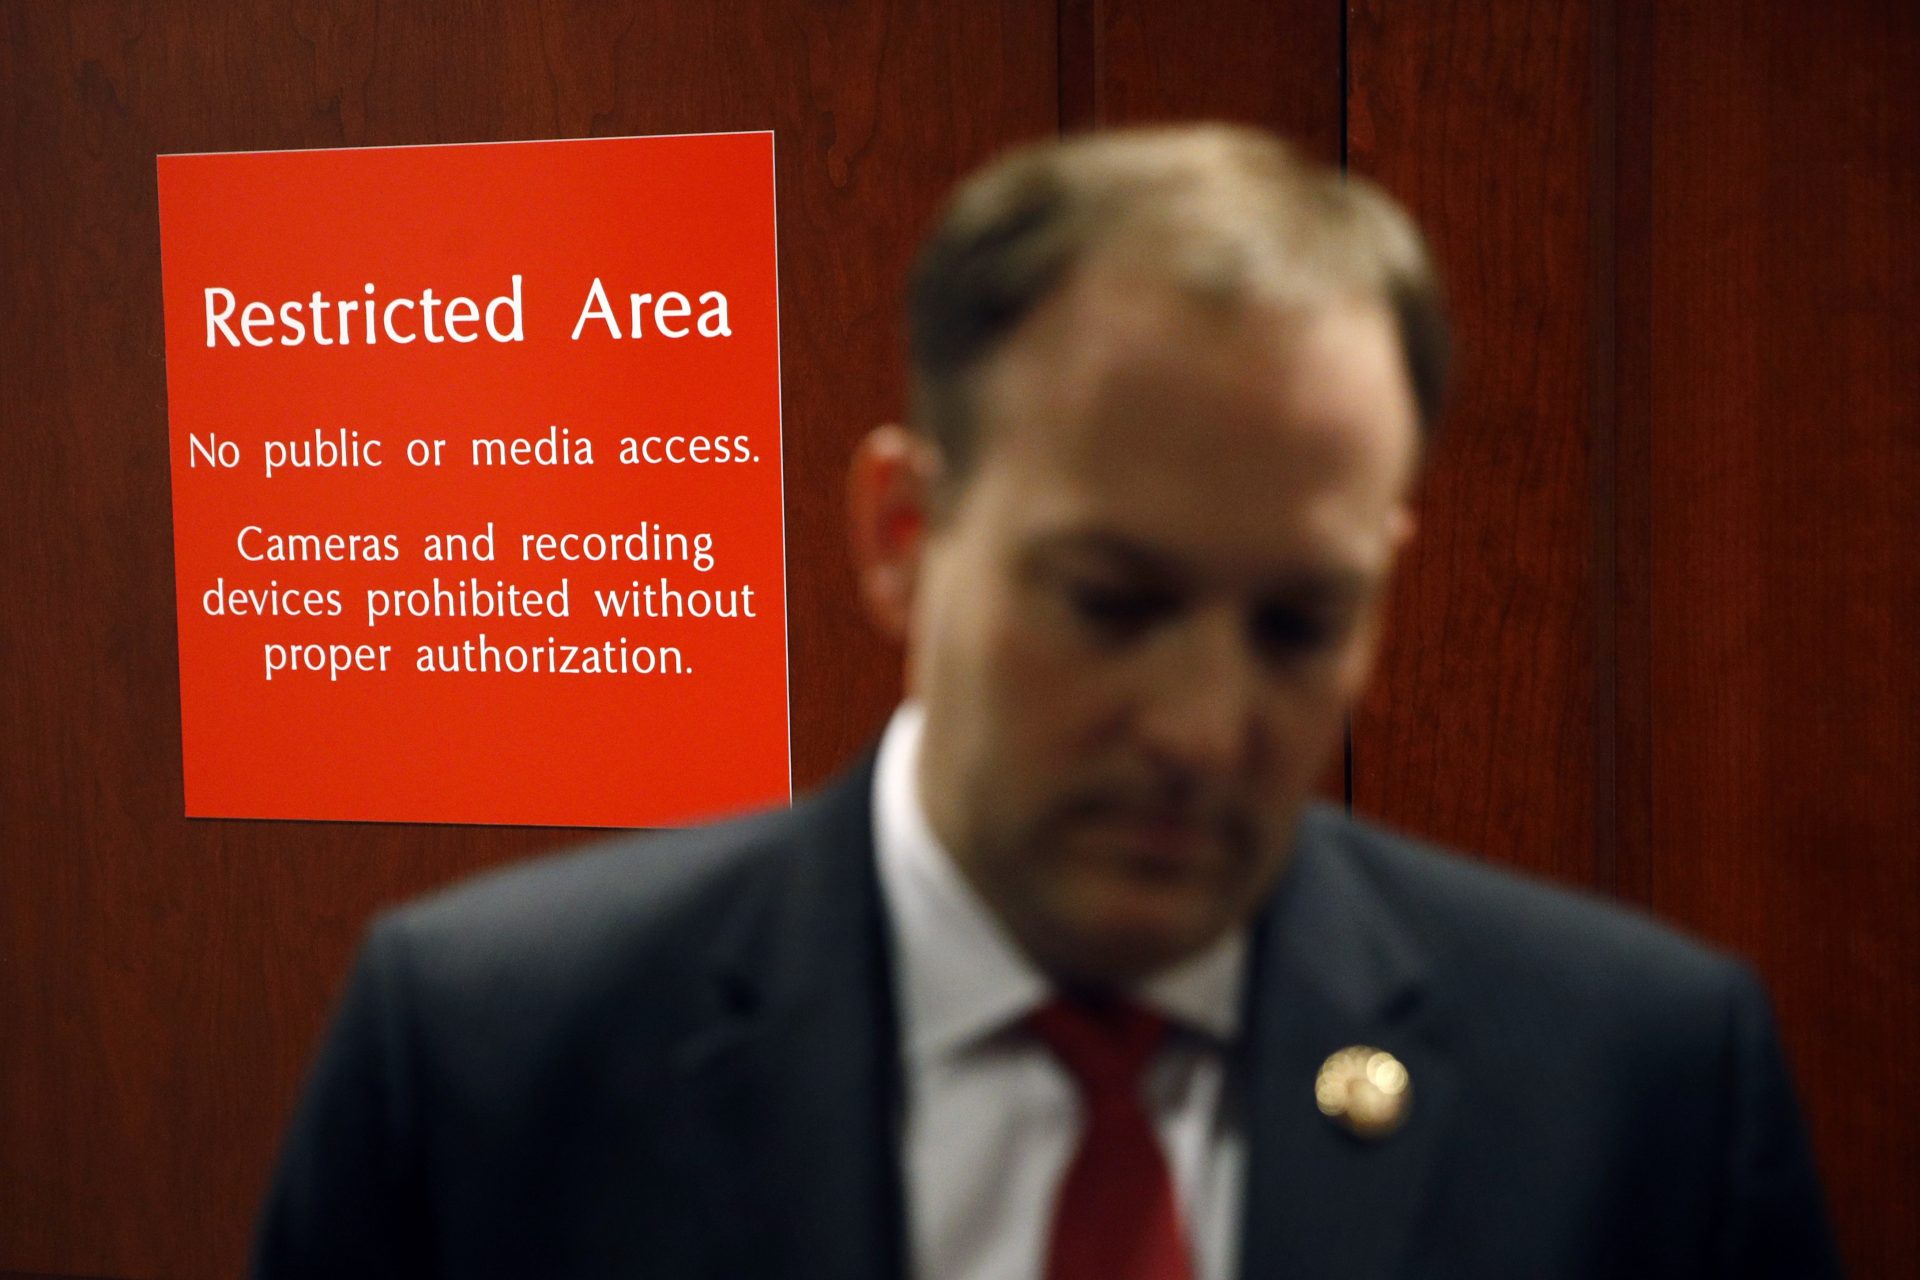 A sign marks a door to a secure area behind Rep. Lee Zeldin, R-N.Y., as he speaks with members of the media after Deputy Assistant Secretary of Defense Laura Cooper arrived for a closed door meeting to testify as part of the House impeachment inquiry into President Donald Trump, Wednesday, Oct. 23, 2019, in Washington.